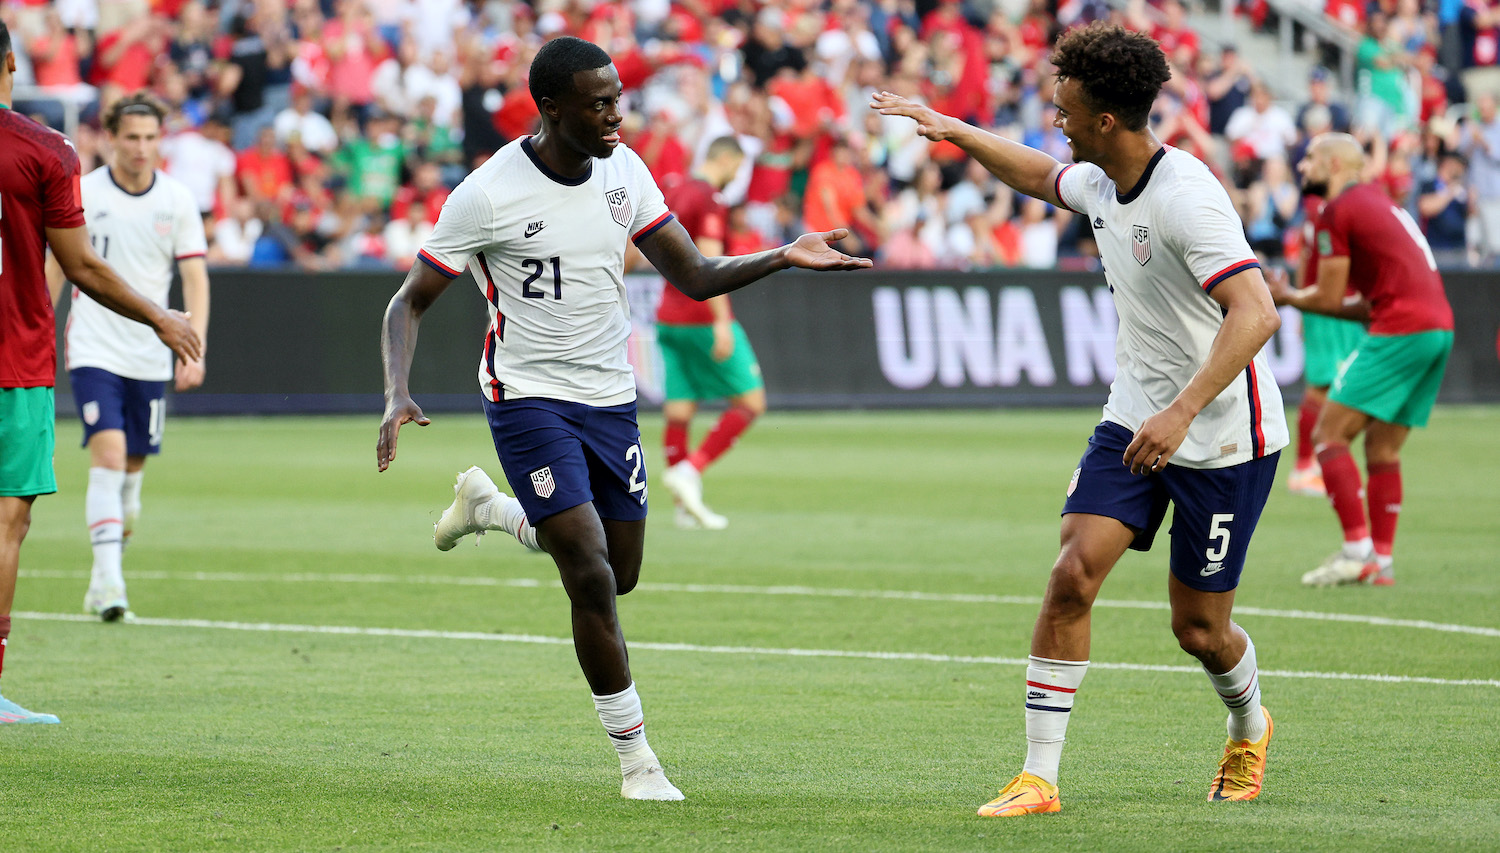 CINCINNATI, OHIO - JUNE 01: Tim Weah #21of the United States celebrates with Antonee Robinson #5 after scoring a first half goal against Morocco at TQL Stadium on June 01, 2022 in Cincinnati, Ohio. (Photo by Andy Lyons/Getty Images)